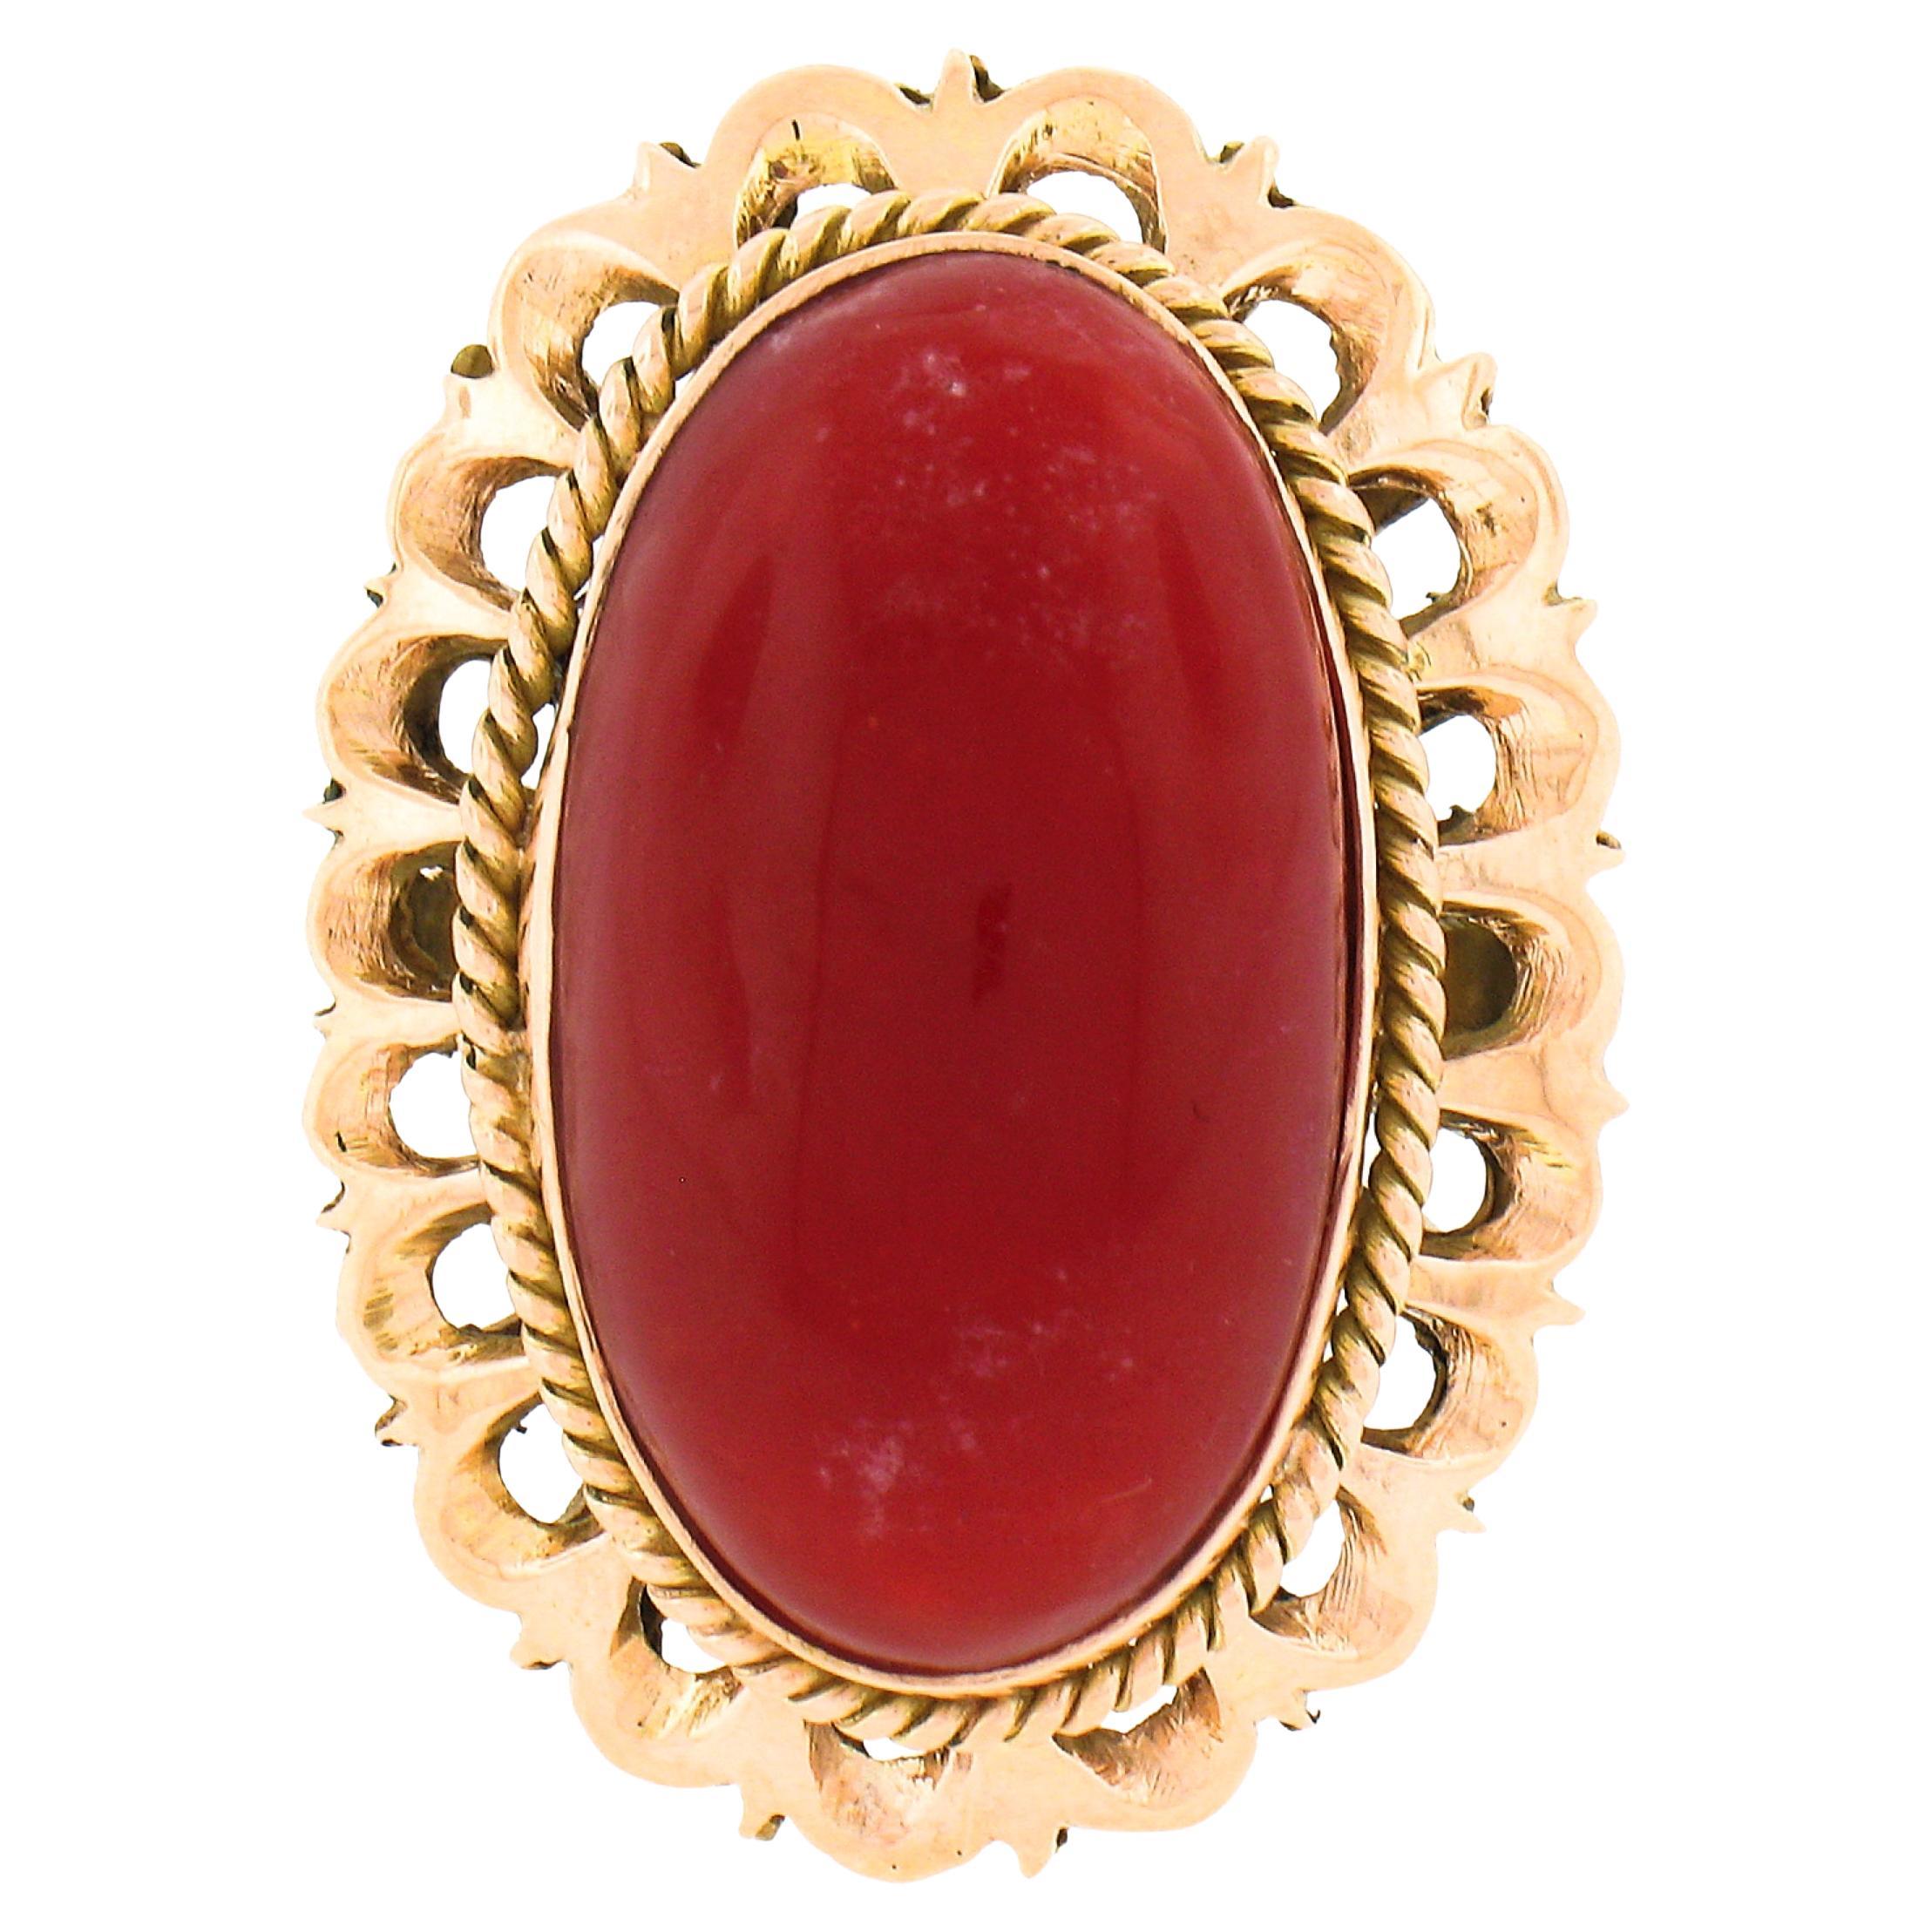 The Triumphant Halo Red Coral Ring